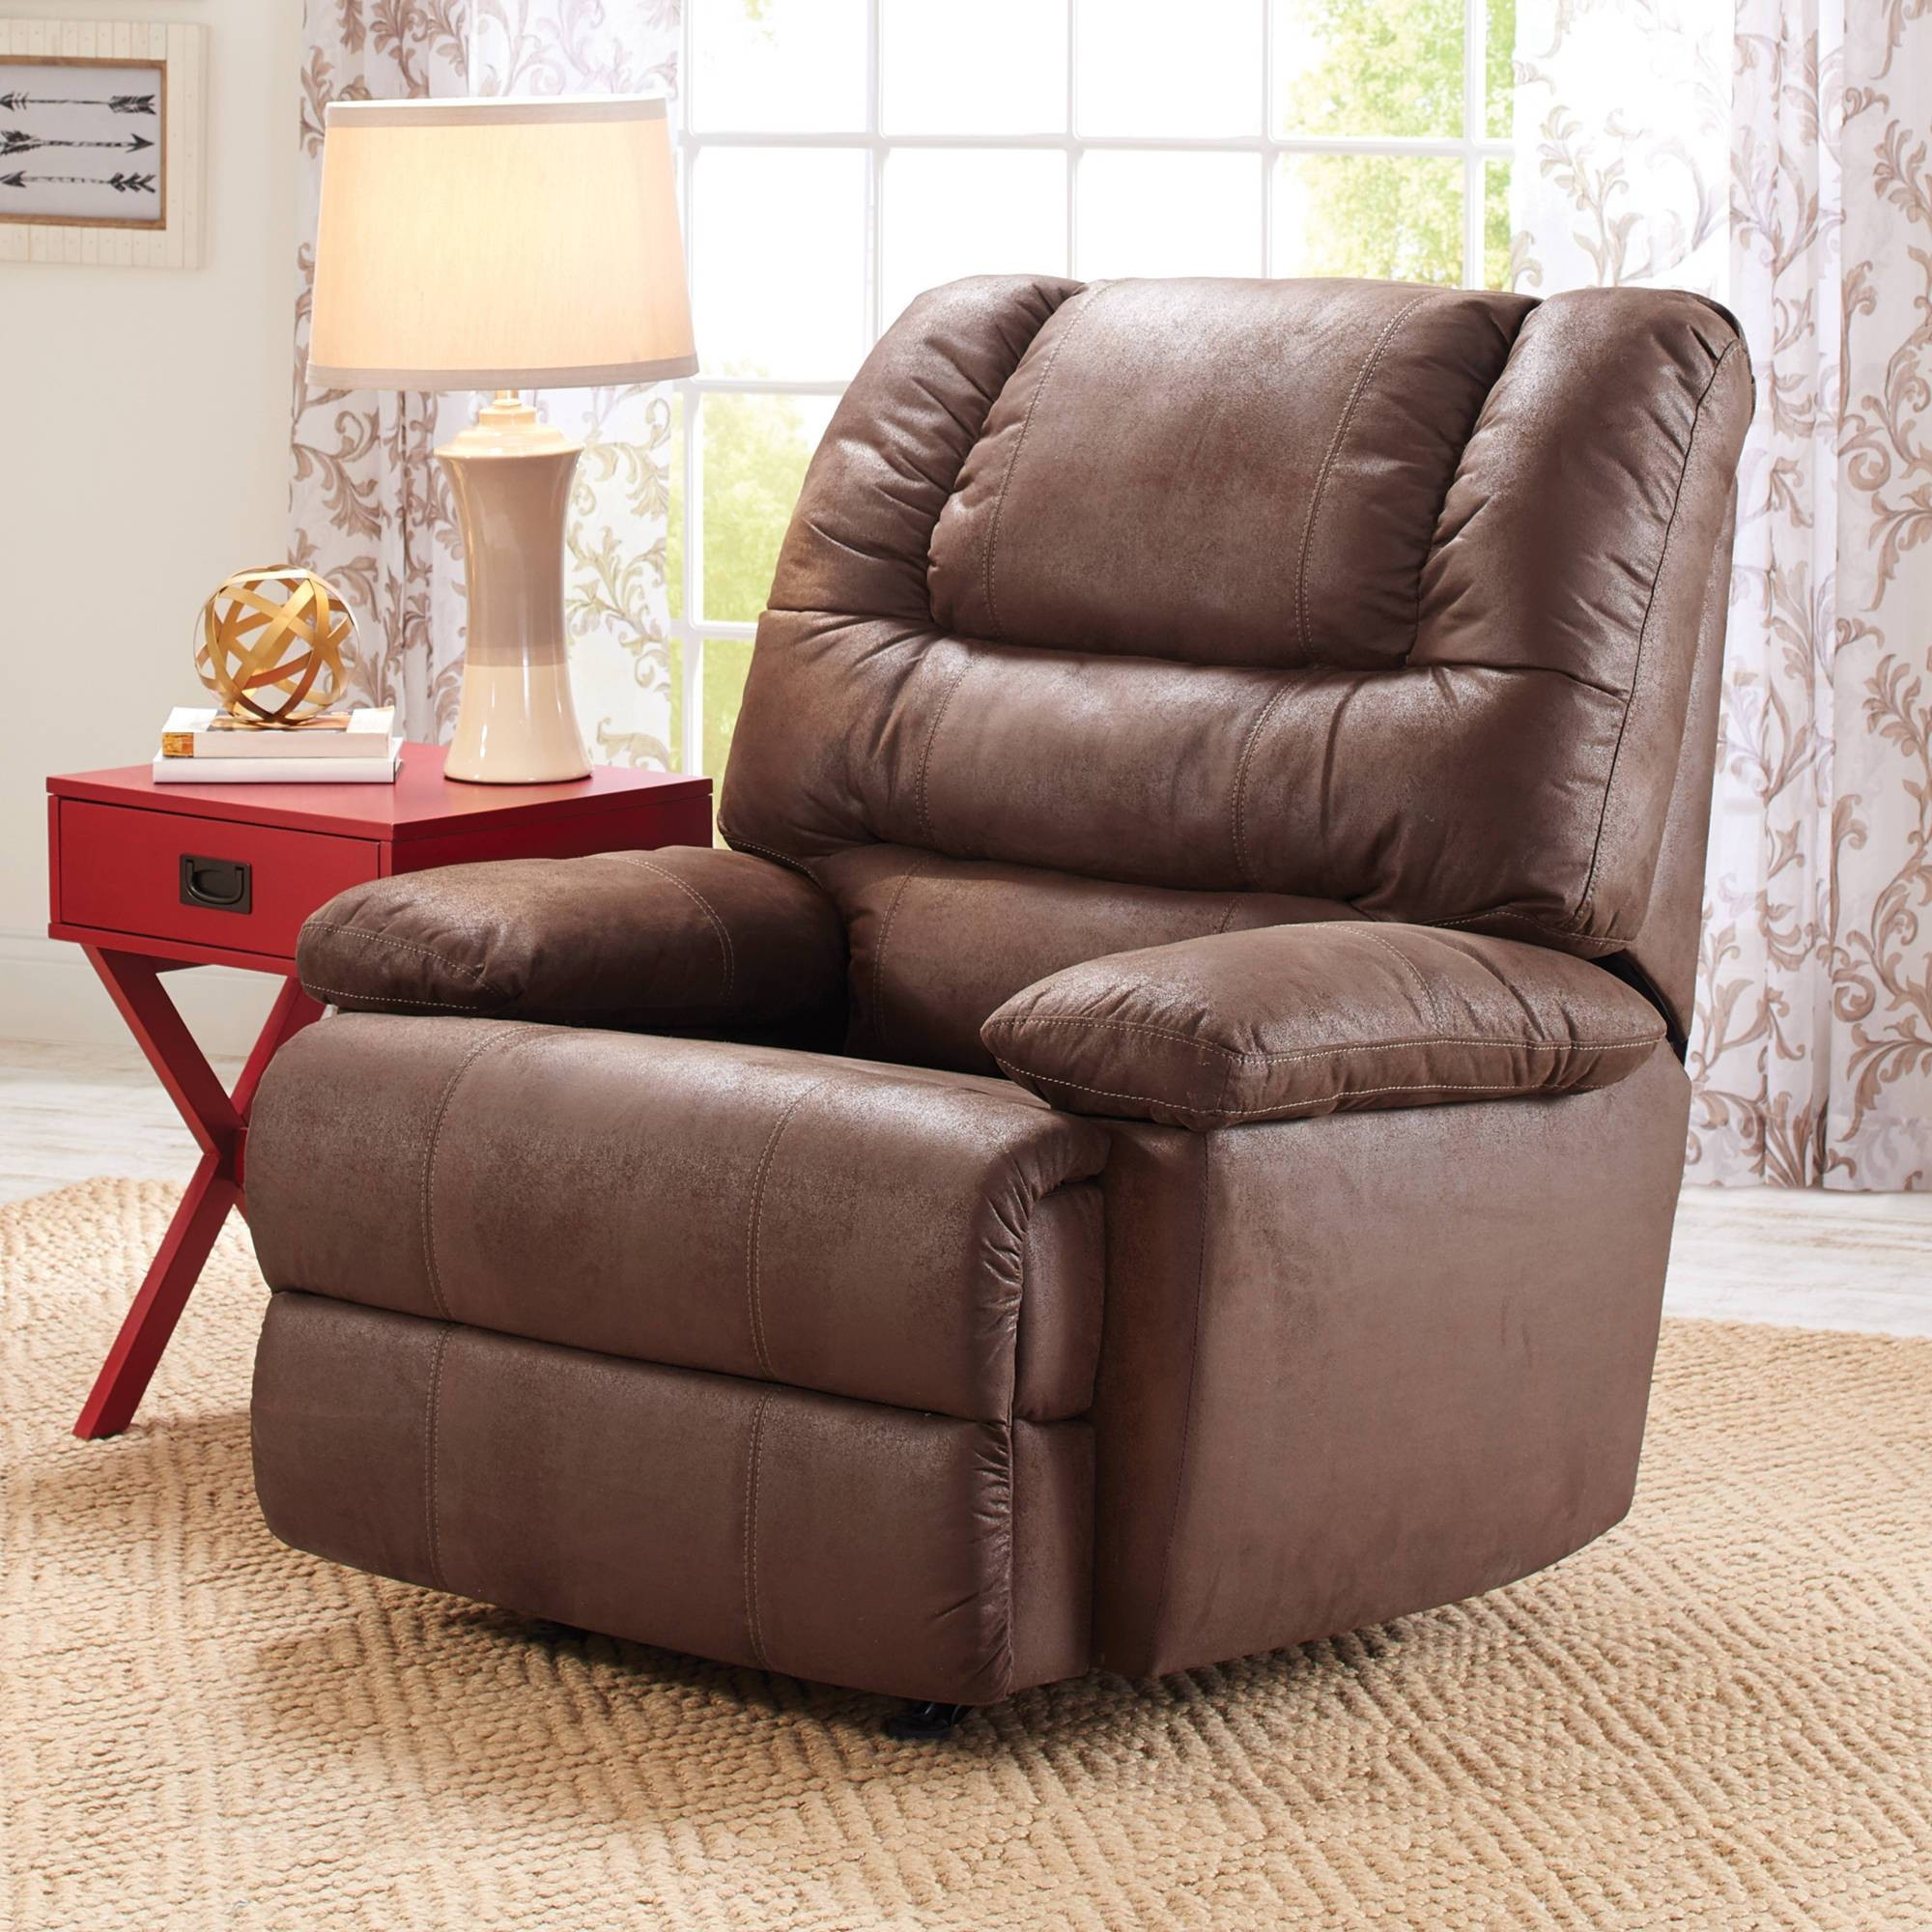 Chairs For Living Room Cheap
 The Best Cool Cheap Sofas